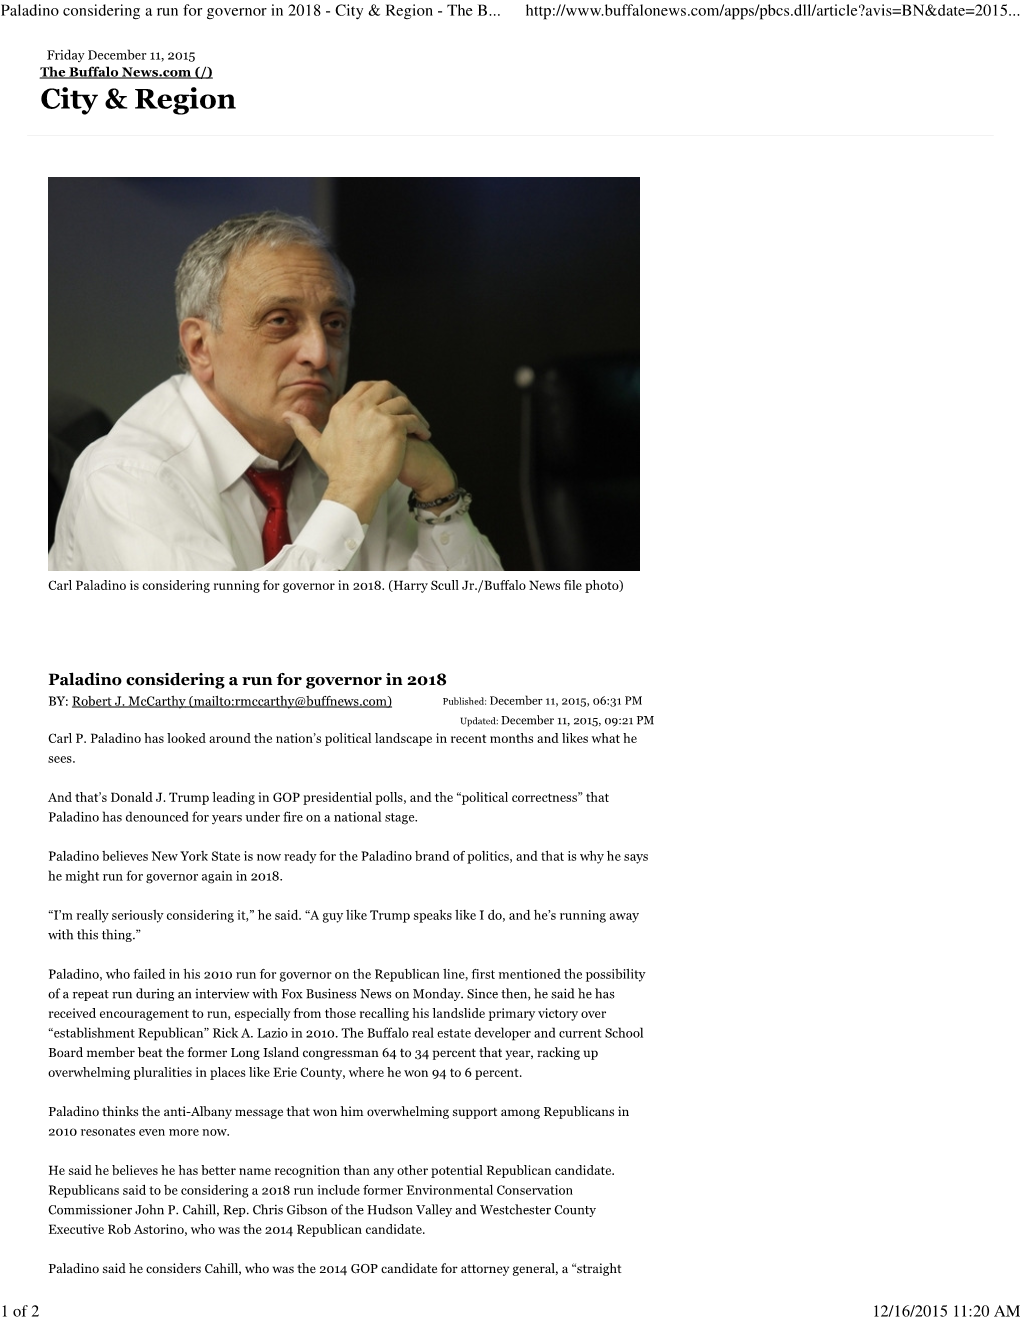 Paladino Considering a Run for Governor in 2018 - City & Region - the B